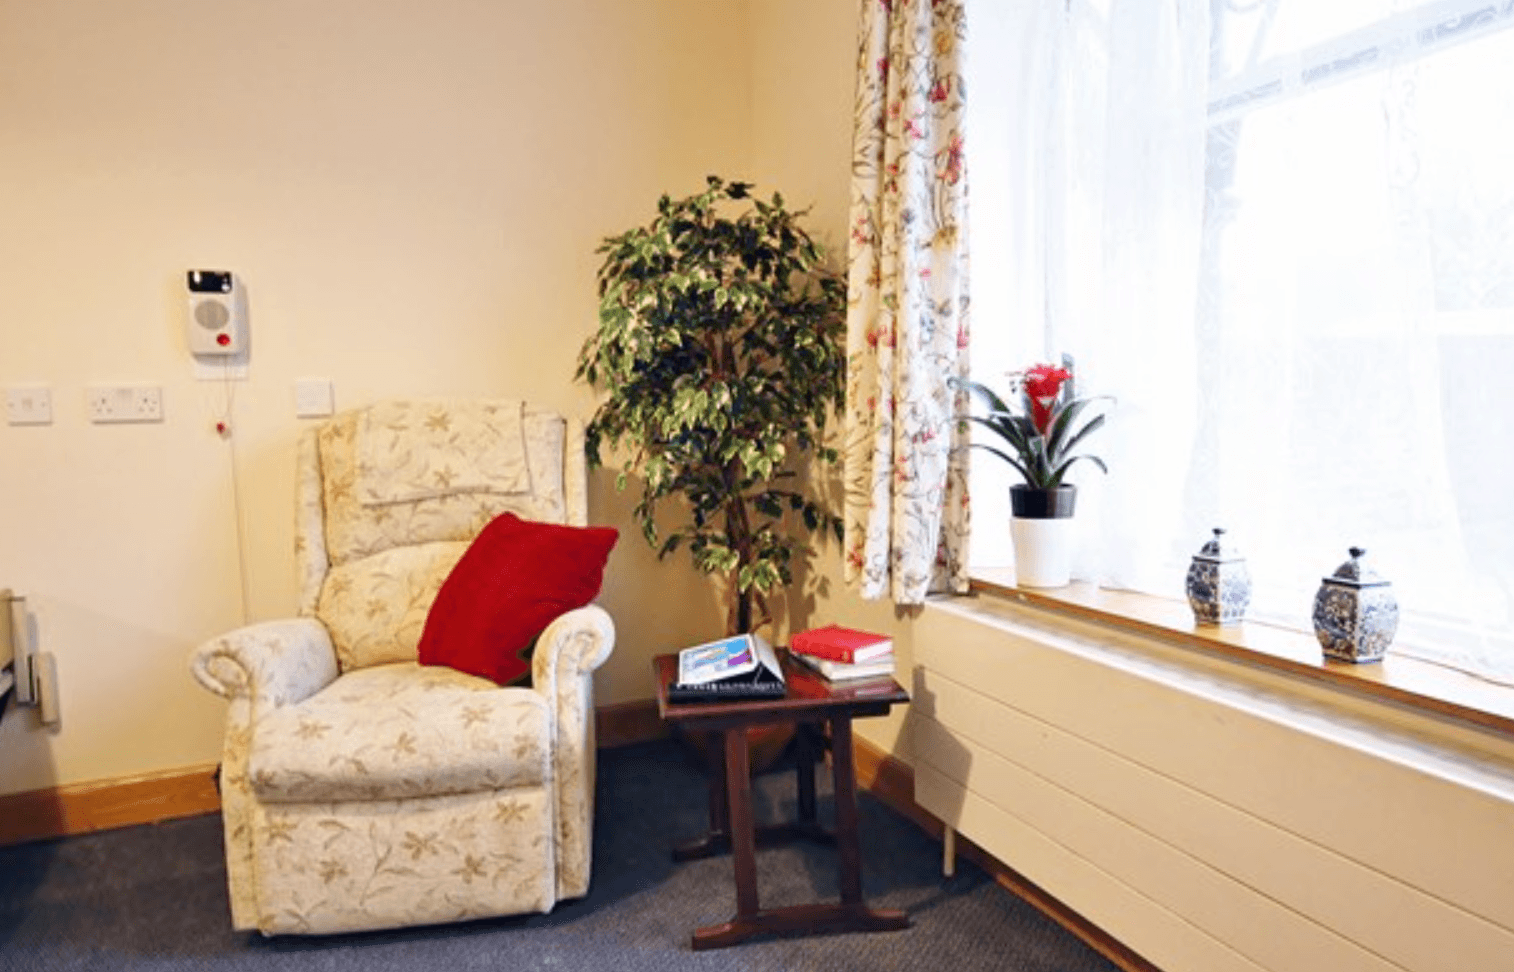 Maitland House Residential Care Home in Reading 6